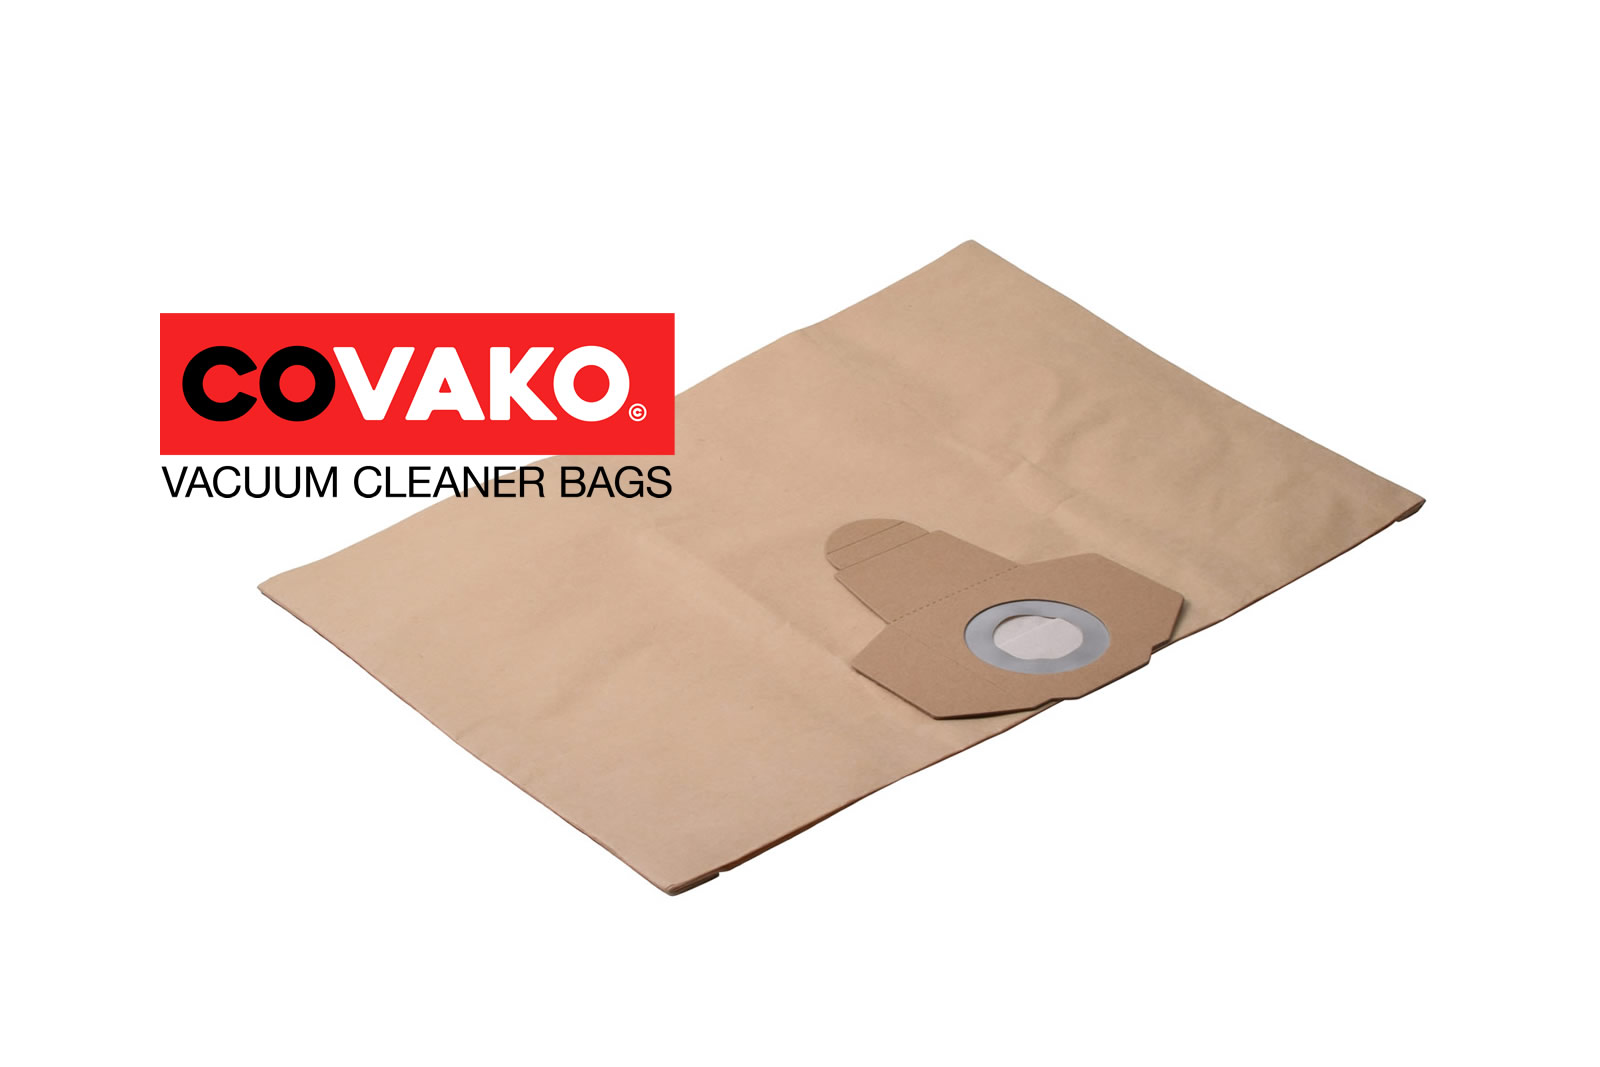 Einhell TC-VC 1820 S / Paper - Einhell vacuum cleaner bags